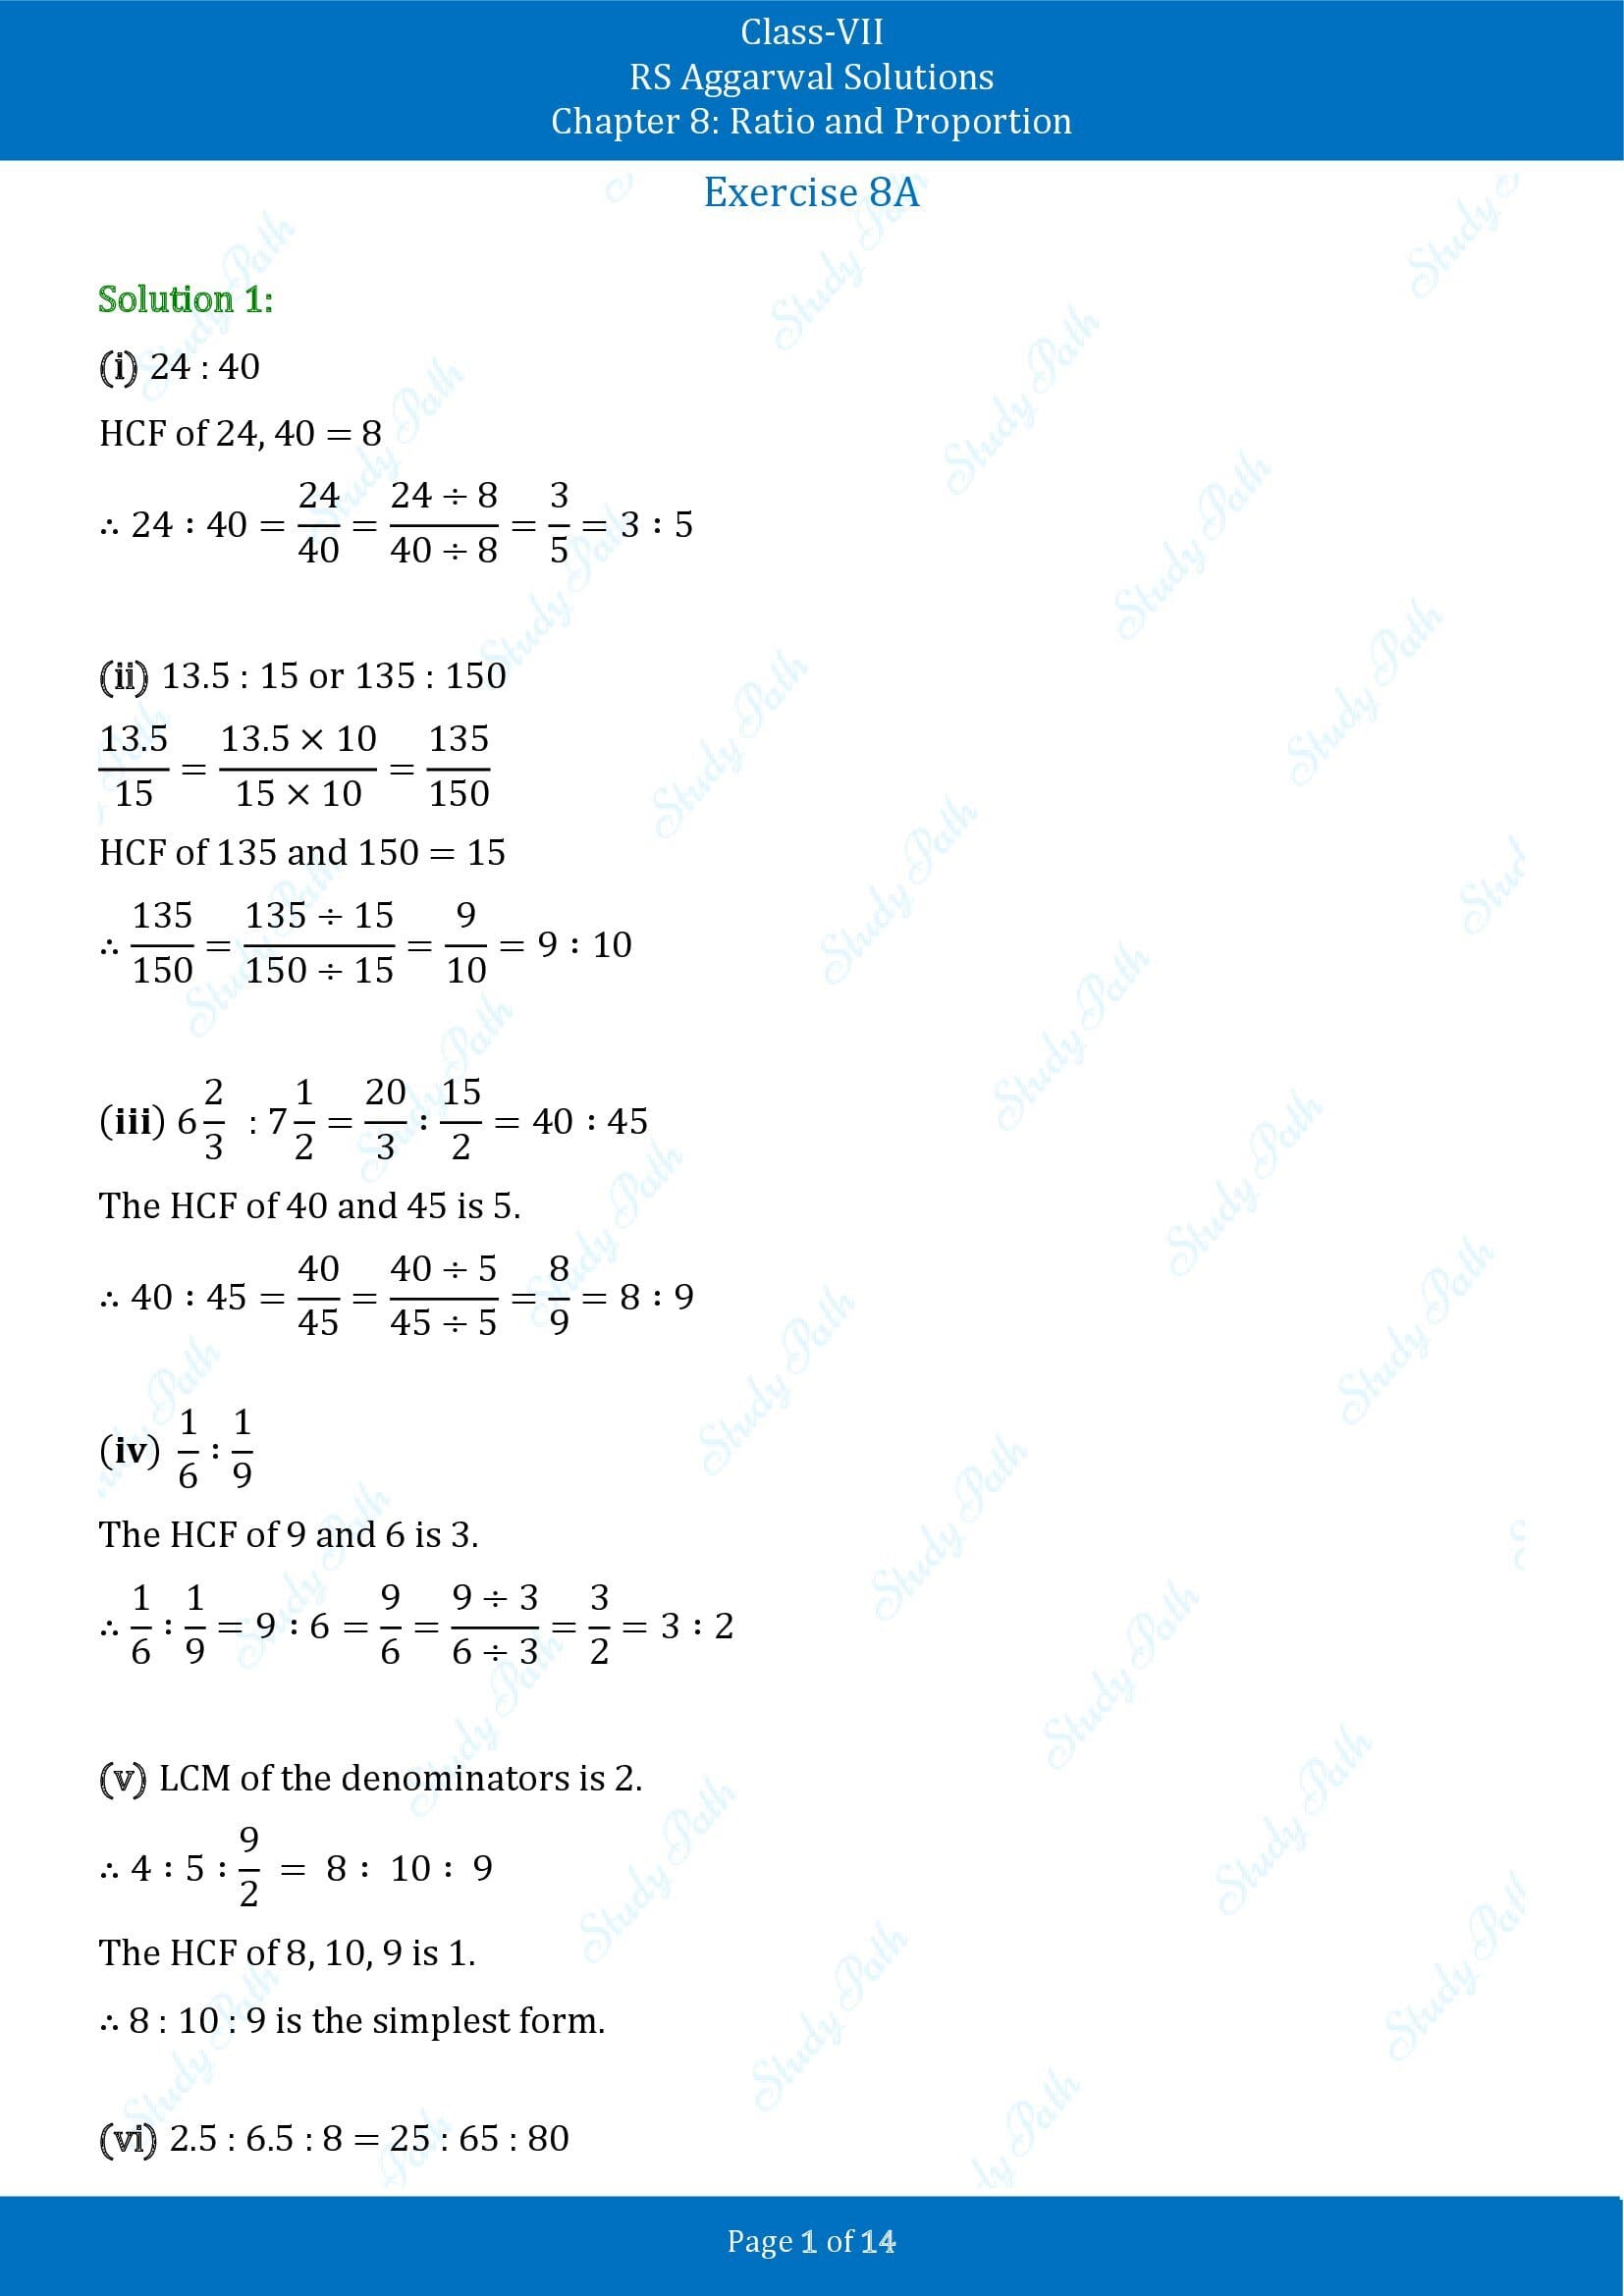 RS Aggarwal Solutions Class 7 Chapter 8 Ratio and Proportion Exercise 8A 00001